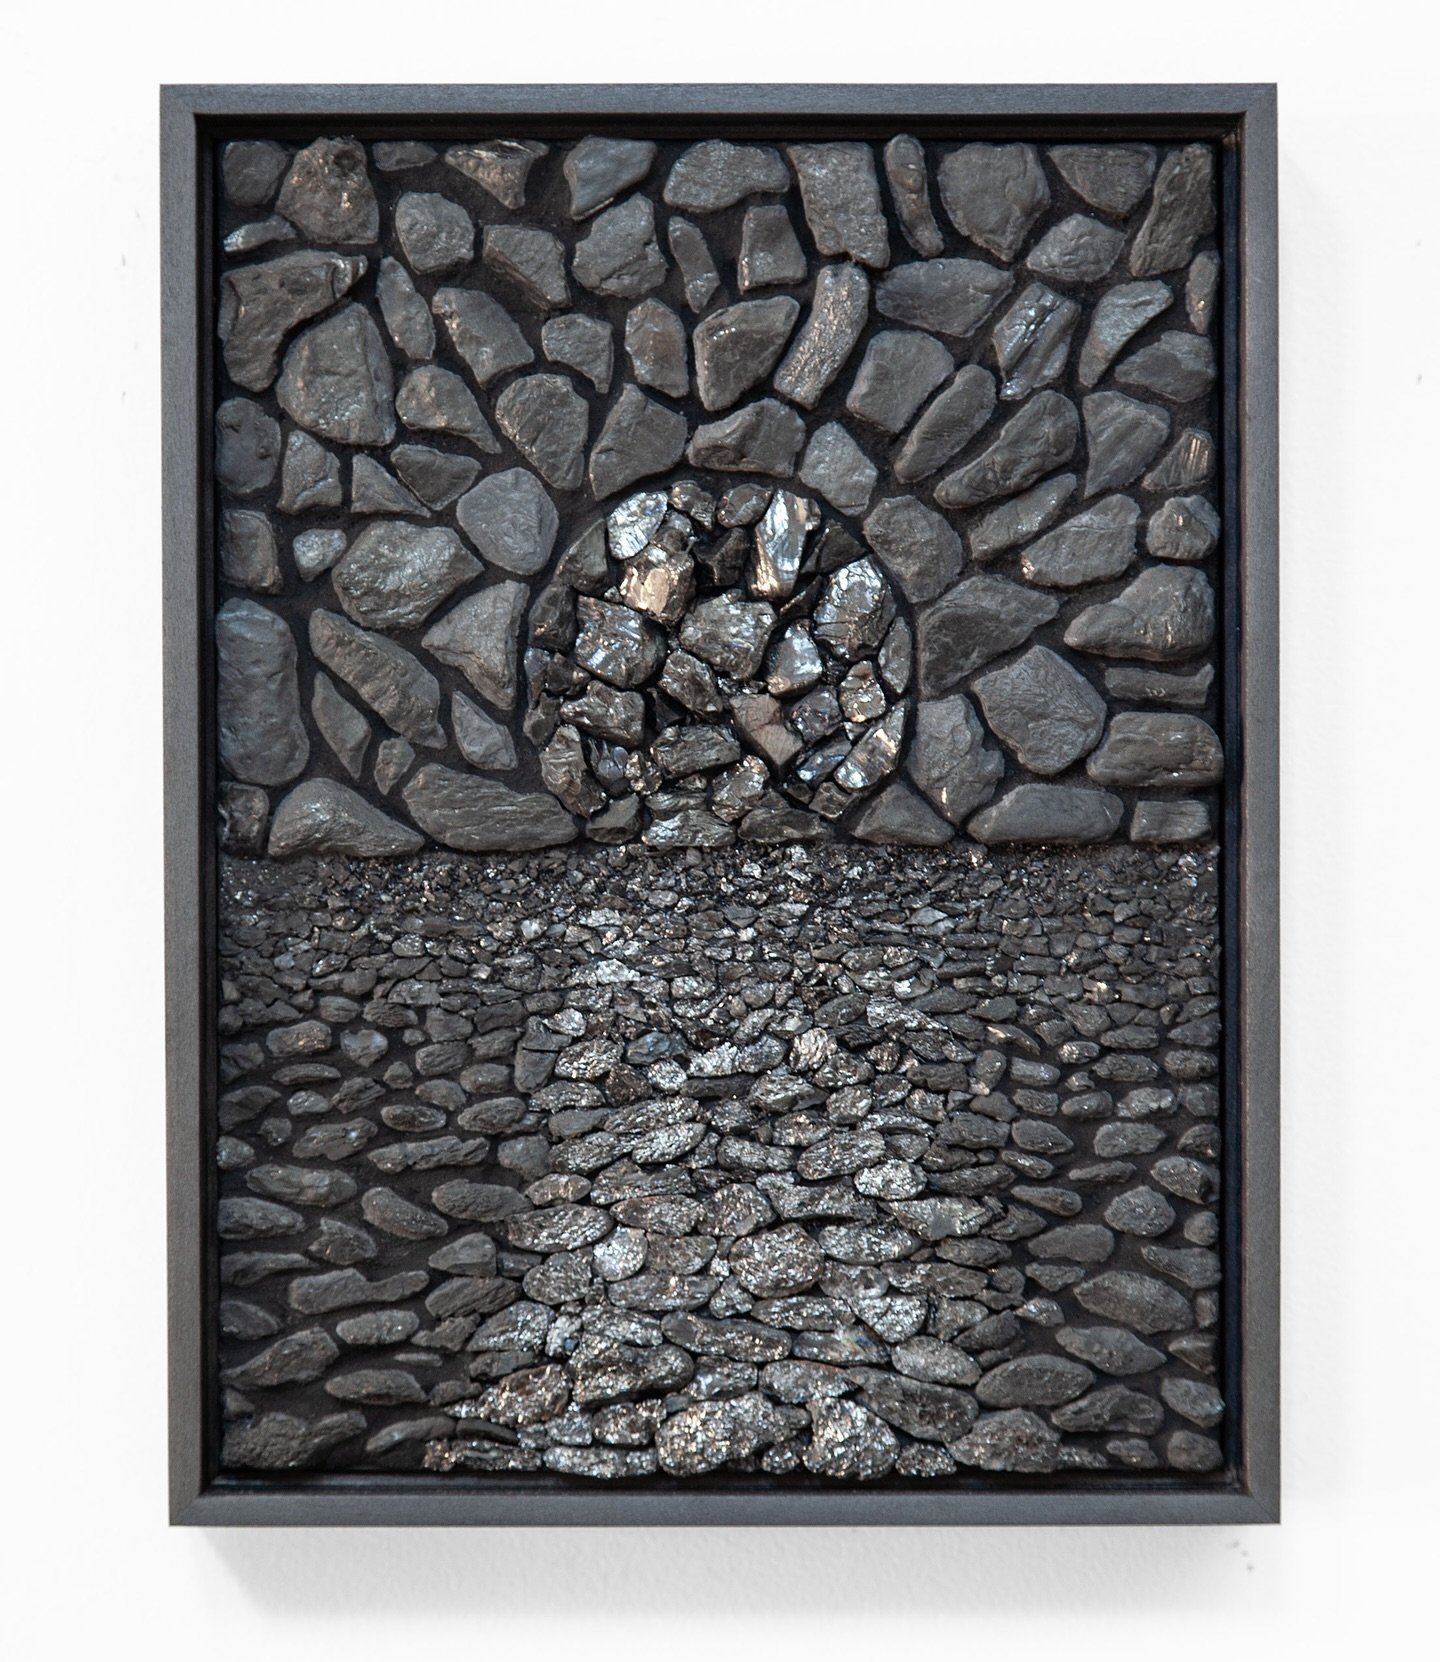 JOSEPH SMOLINSKI
Glimmer - Minor
14&rdquo; x 11&rdquo;
Sea coal and panel in artist&rsquo;s frame
2020

On view as part of &lsquo;This Ain&rsquo;t No Fooling Around,&rsquo; featuring the work of Jackie Brown @j_a_c_k_i_e_b_r_o_w_n , Lydia Kinney @l.m